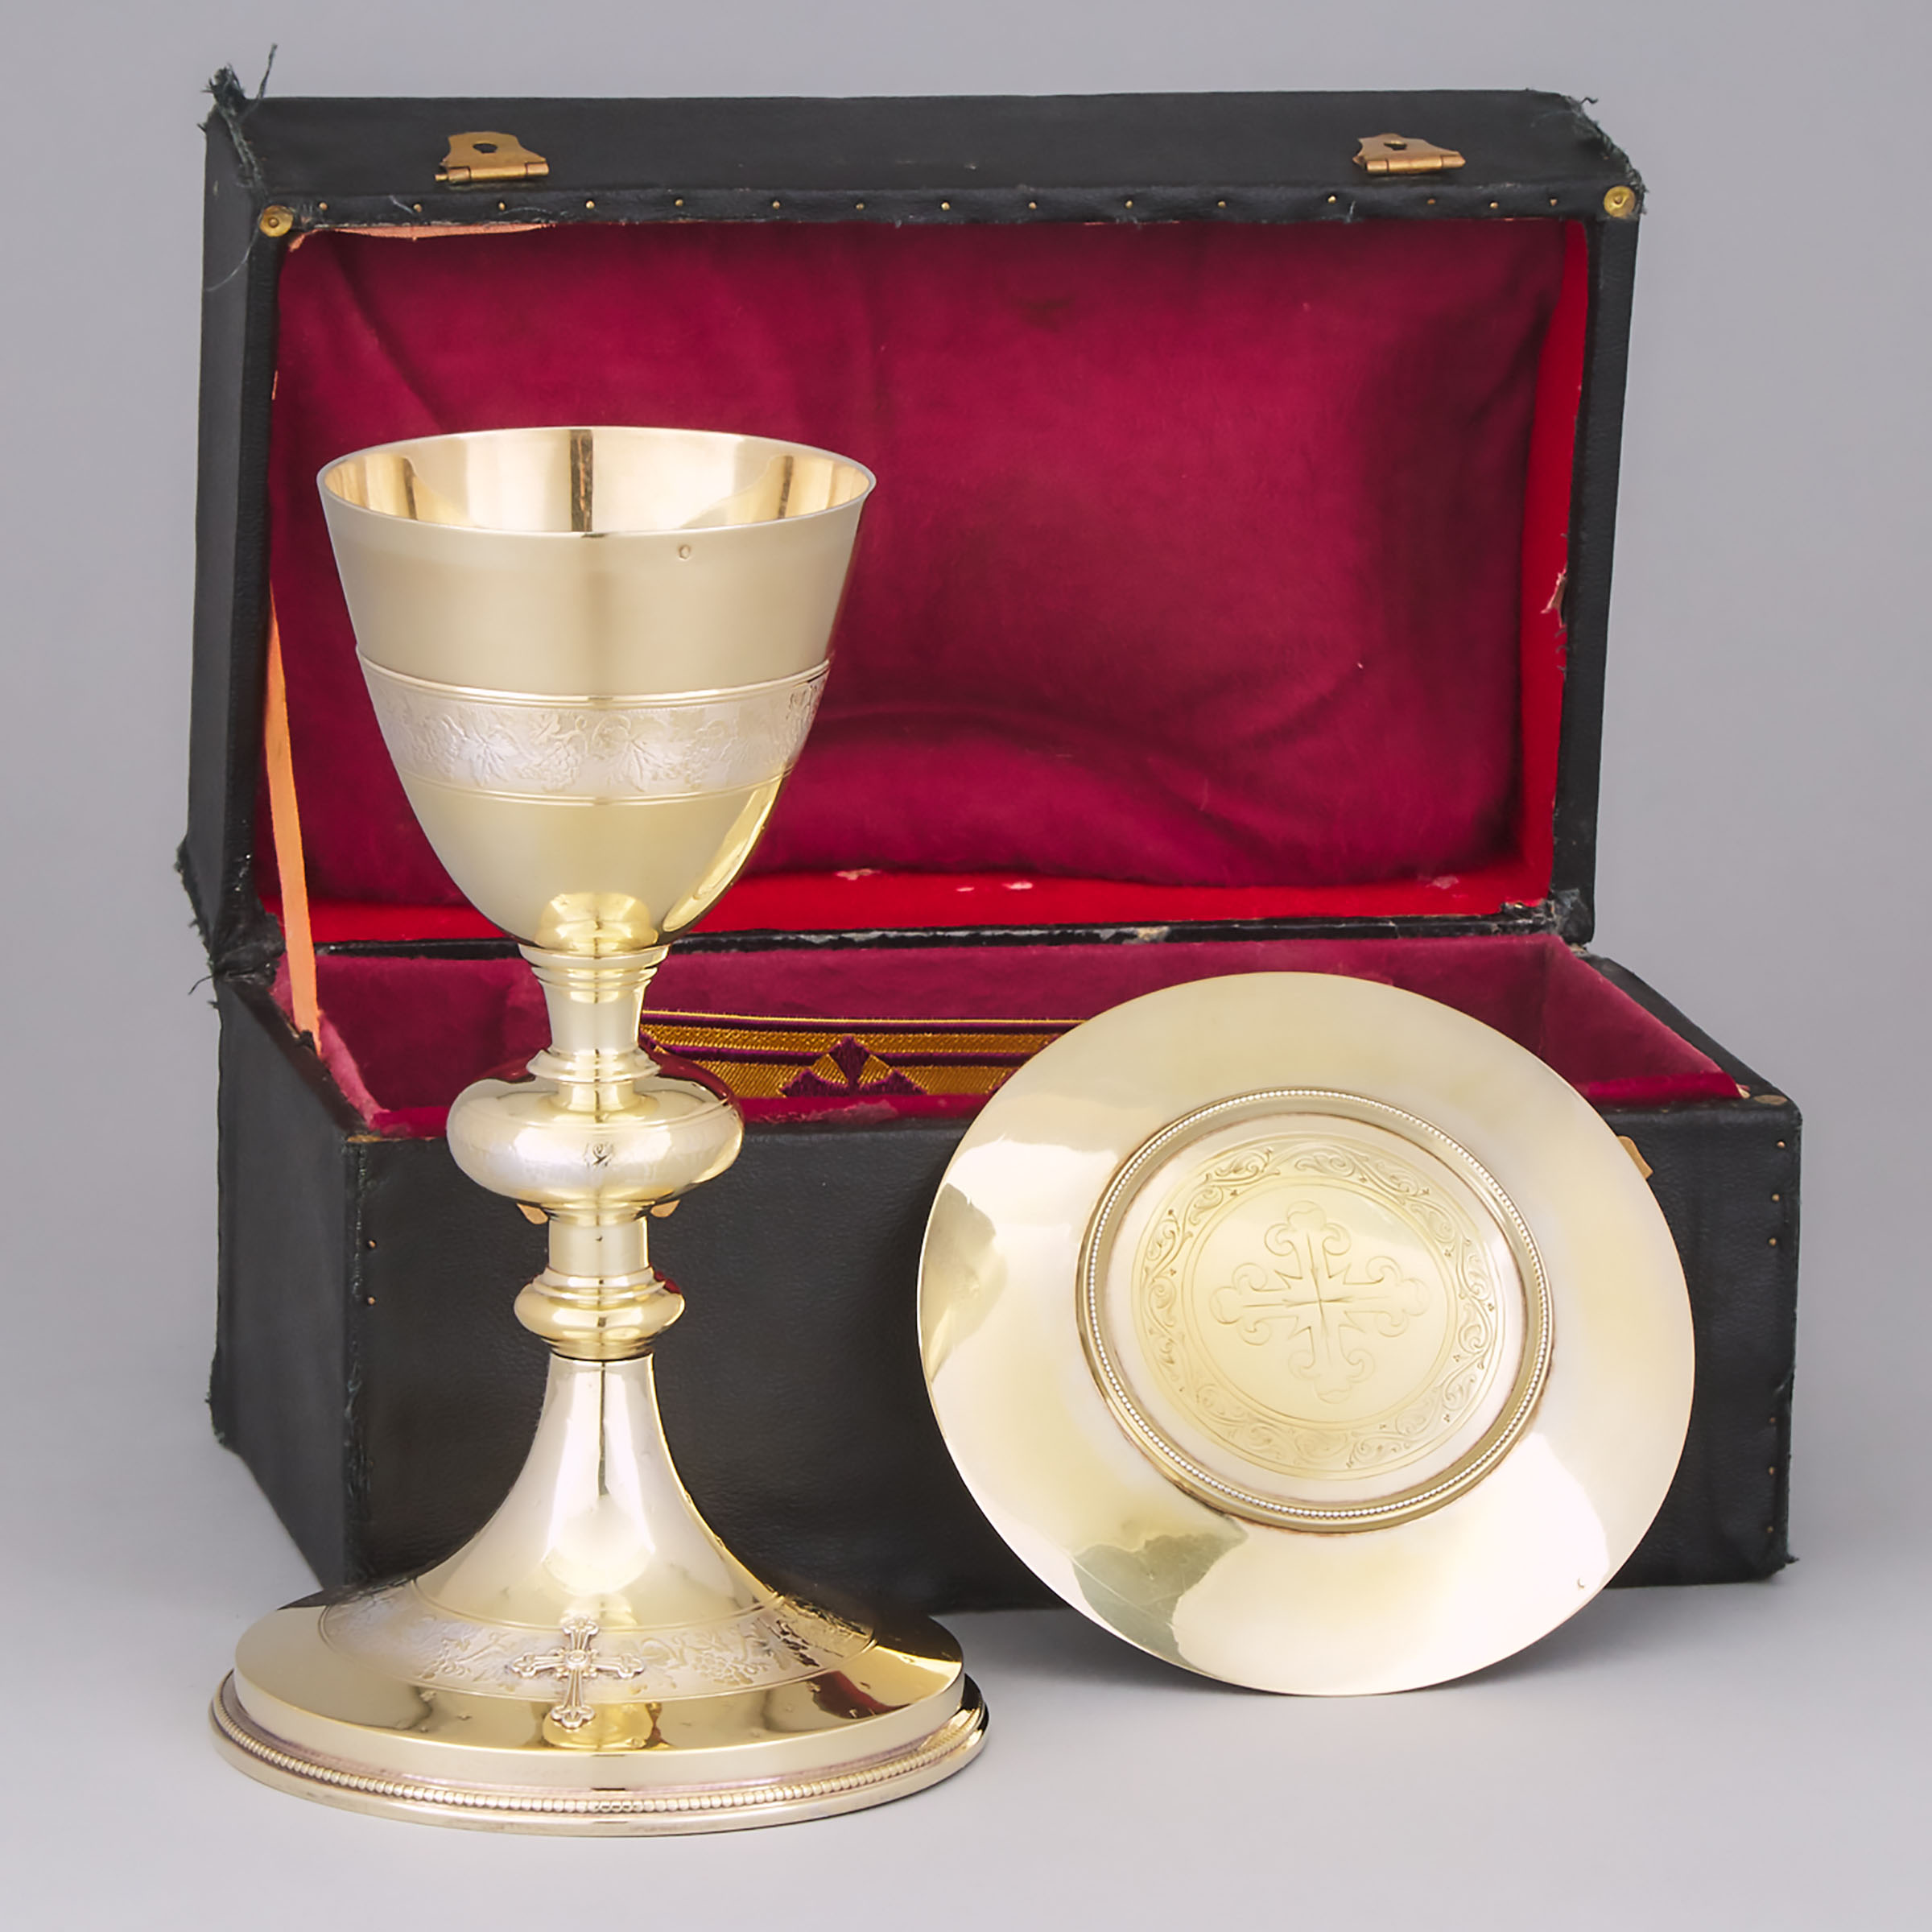 French Silver-Gilt and Plated Chalice and Paten, late 19th/early 20th century